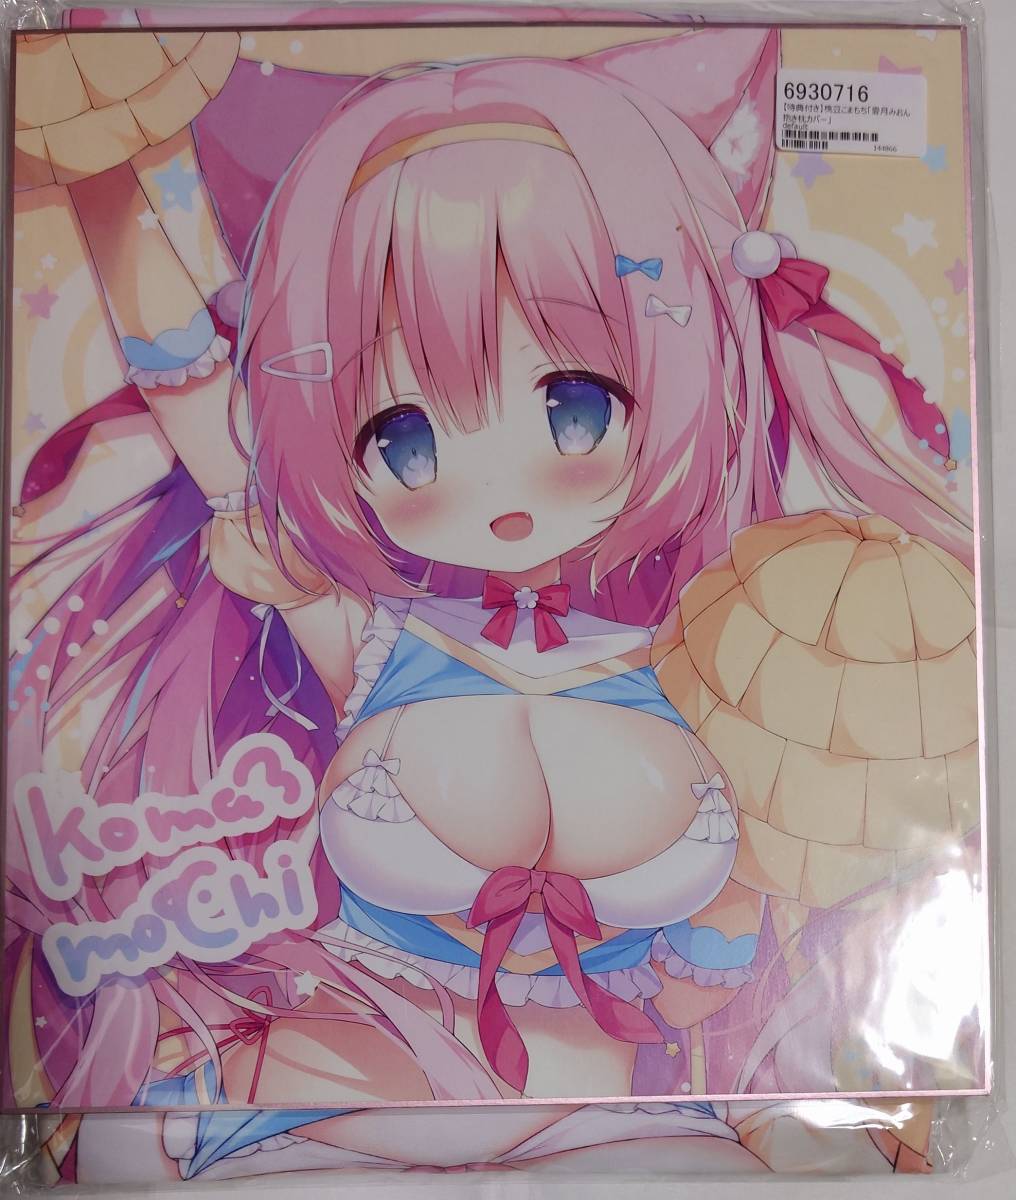 [ peach legume whirligig mochi ]. attaching . love month ... Dakimakura cover autographed . made square fancy cardboard attaching Sakura mochi .. already . with special favor new goods unopened regular goods 1 jpy start 